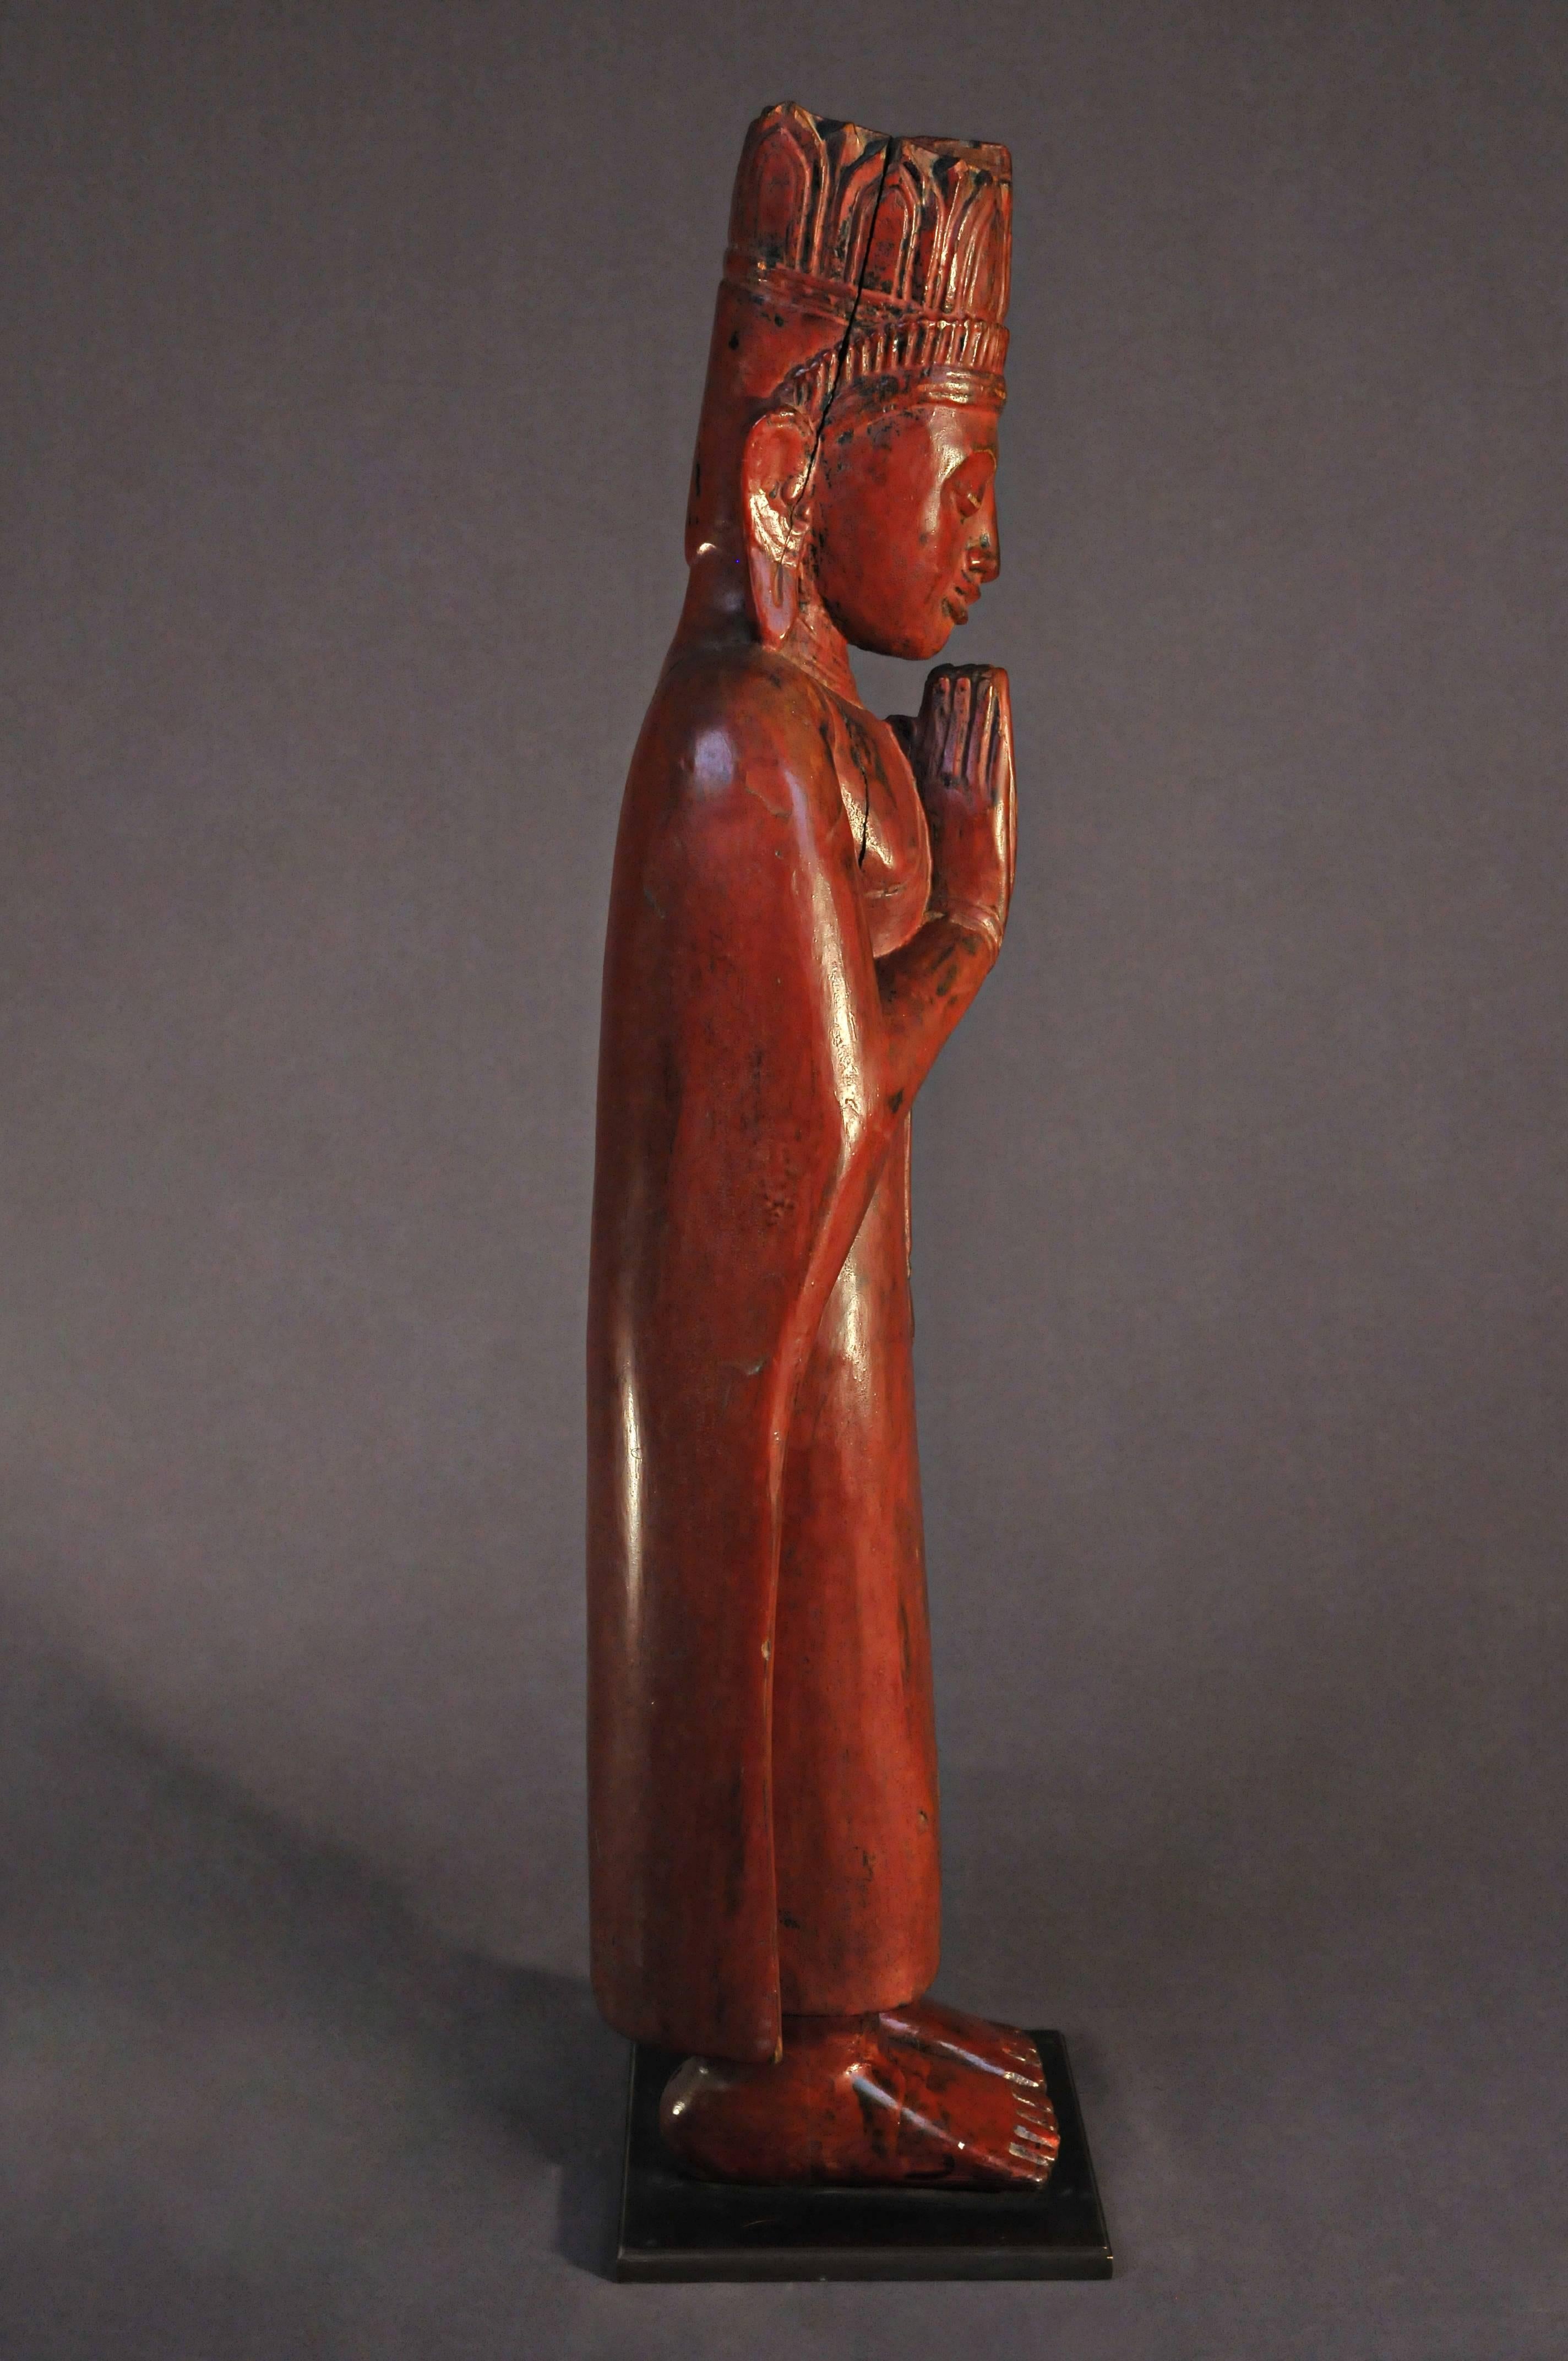 18th Century and Earlier 16th Century, Lacquered Wood Standing Monks in Anjali Mudra, Pagan Period, Burma